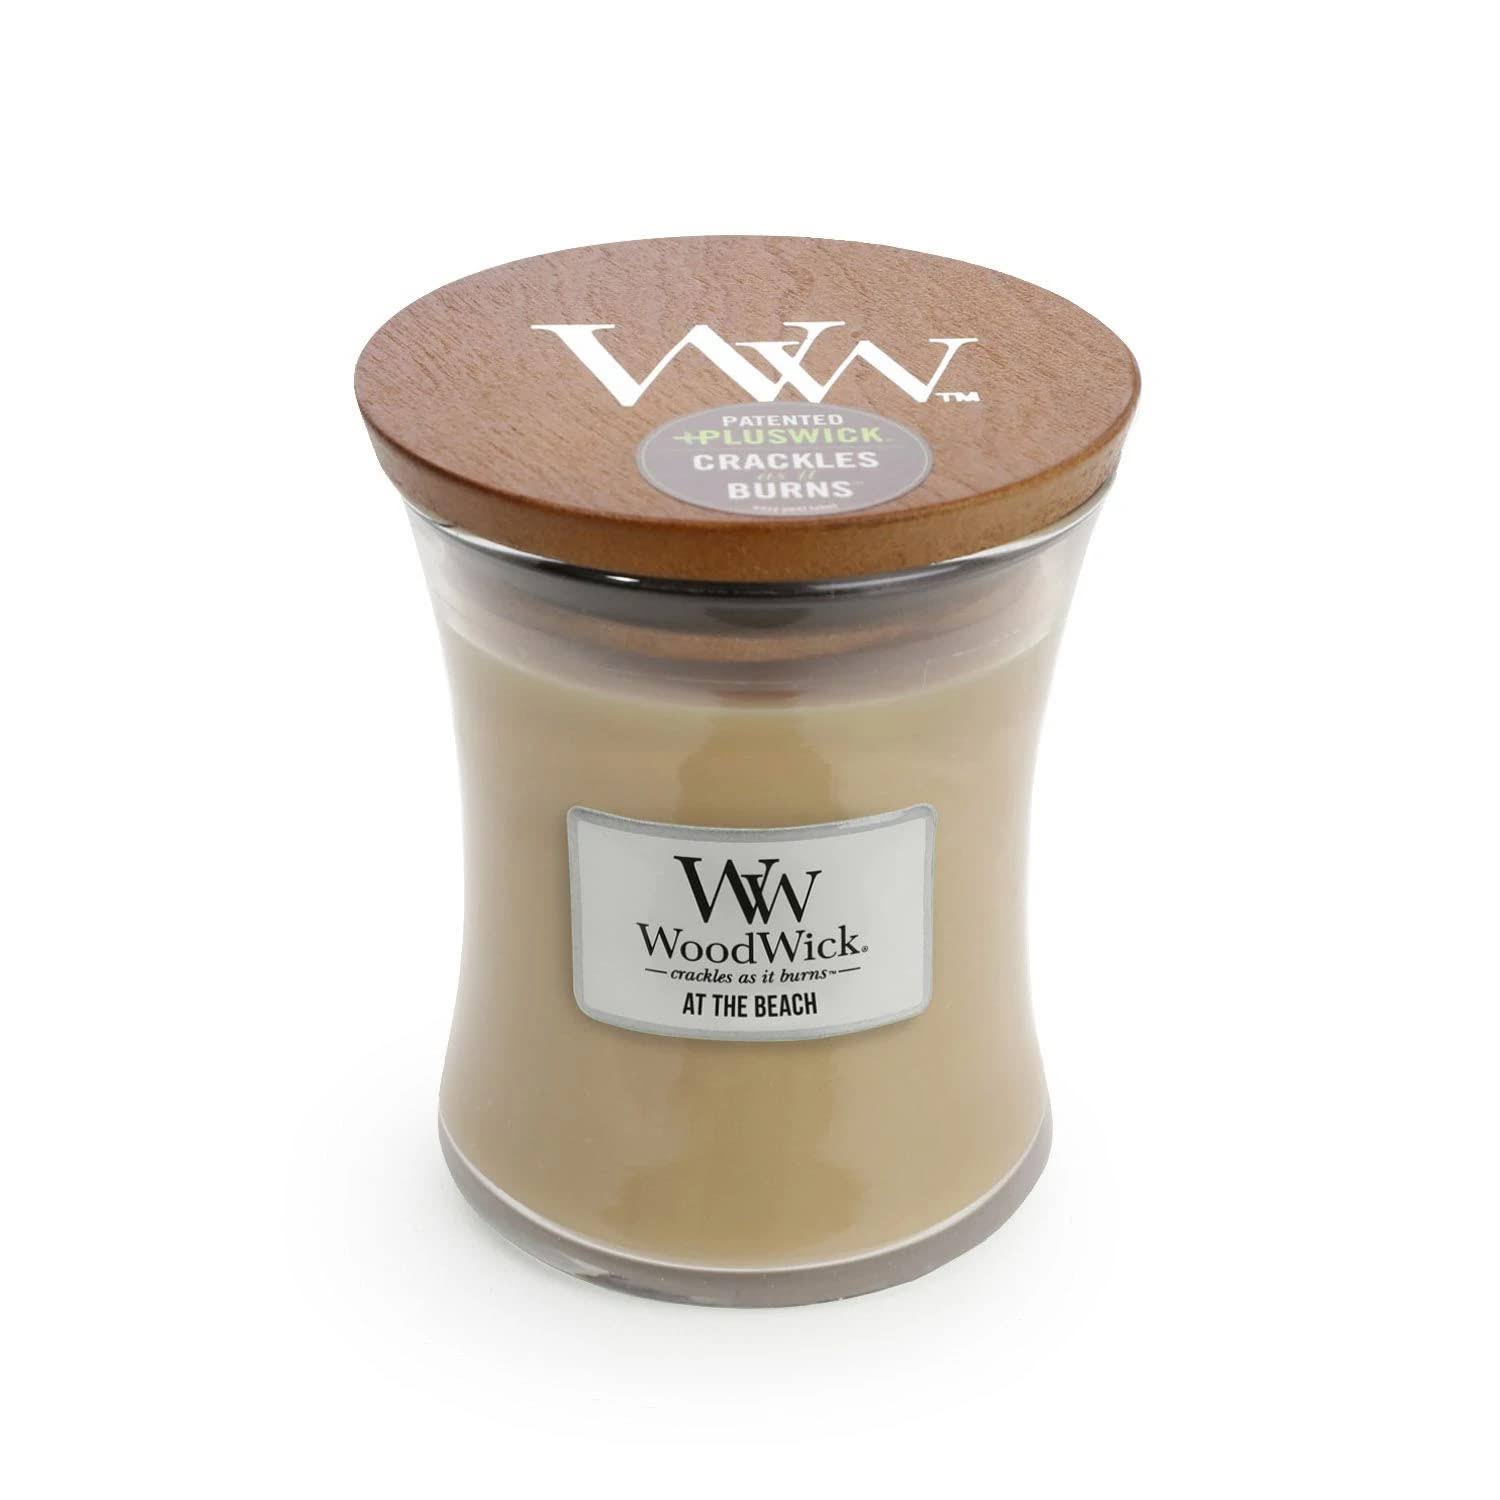 Woodwick at the Beach Scented High Quality Soy Wax Candle - Medium